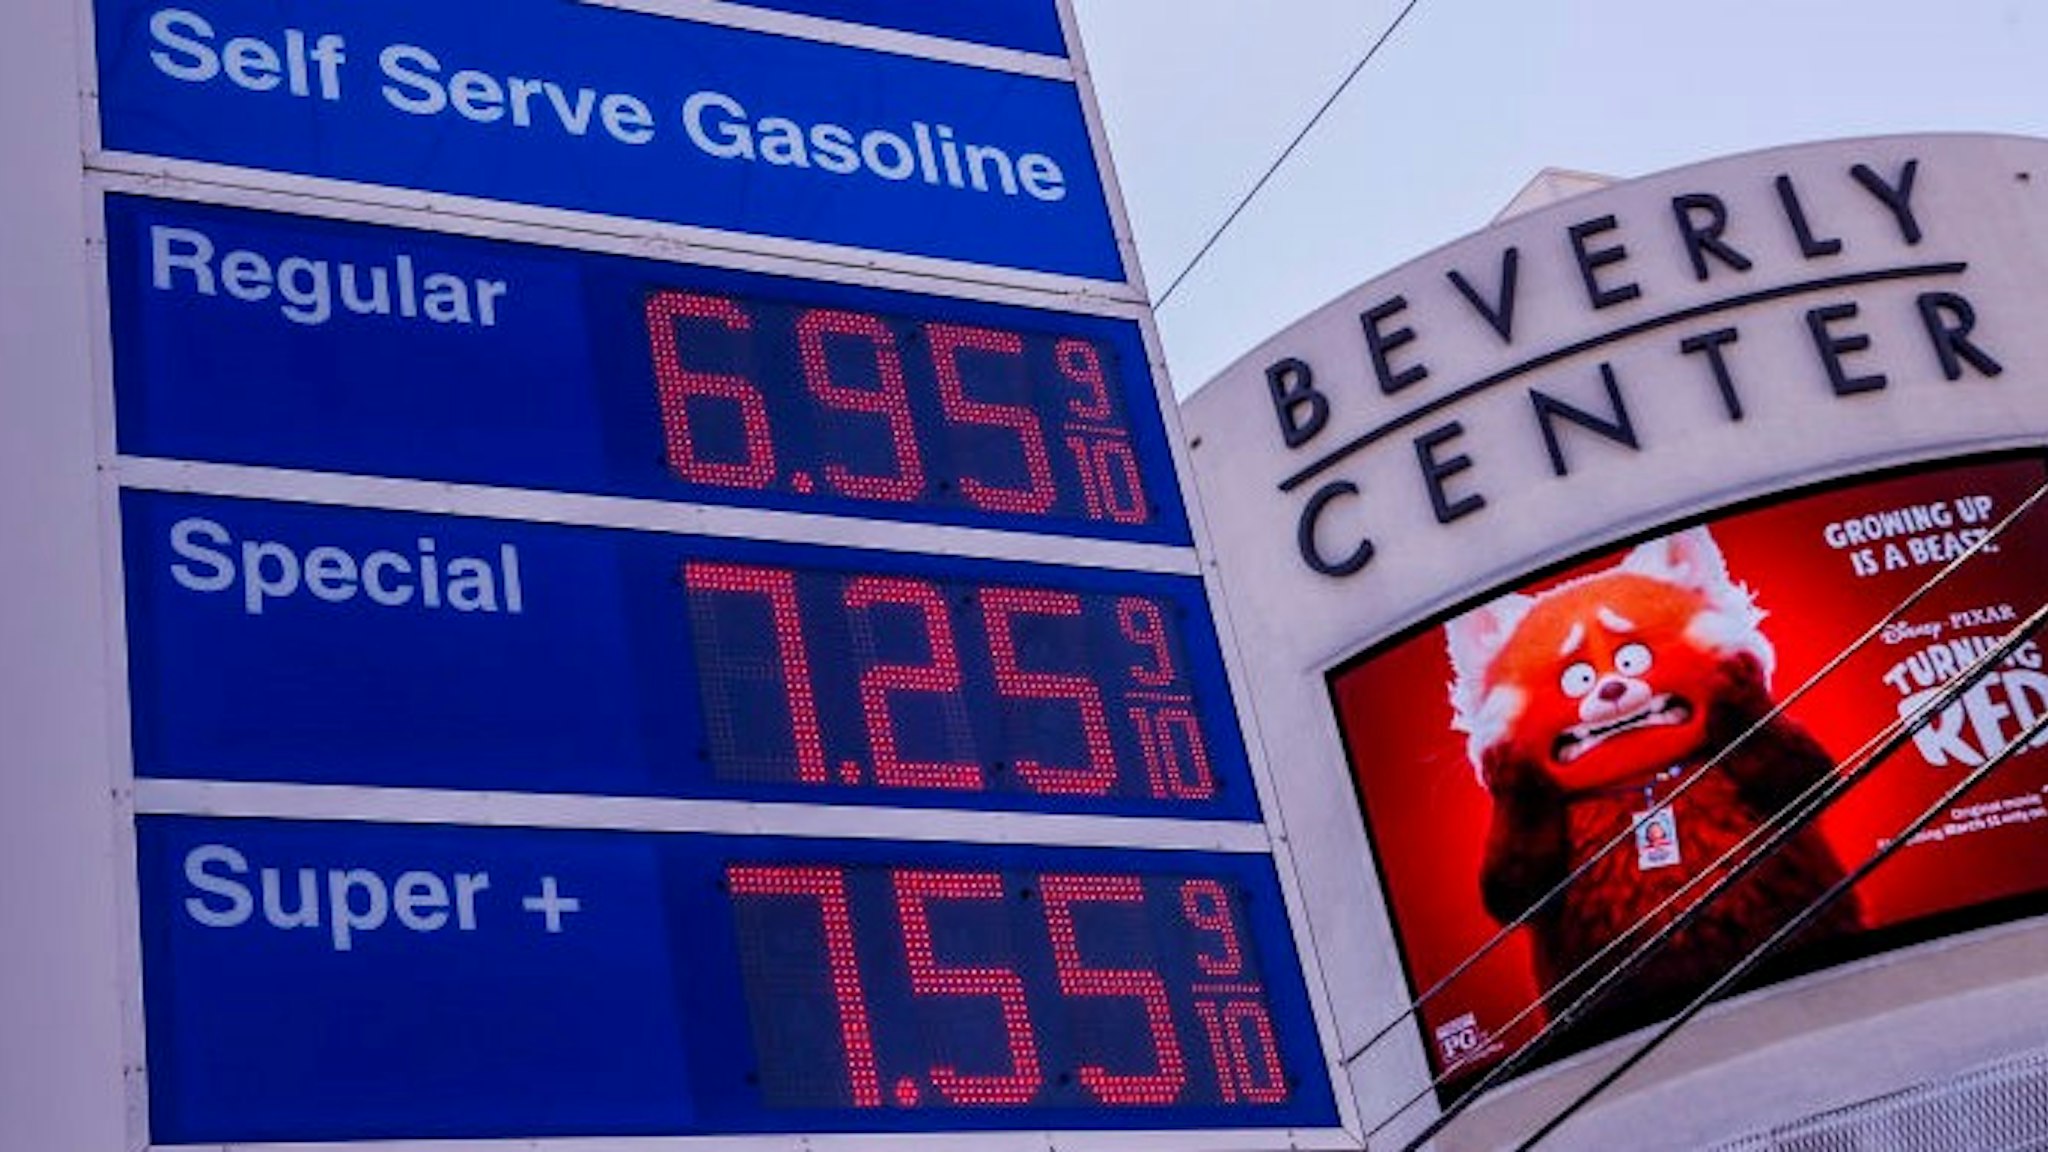 West Hollywood, CA, Tuesday, March 8, 2022 - The Mobil station at the corner of La Cienega and Beverly advertise prices higher than the norm throughout the Los Angeles area. Across the street is the Beverly Center where the Pixar movie Turning Red is advertised.